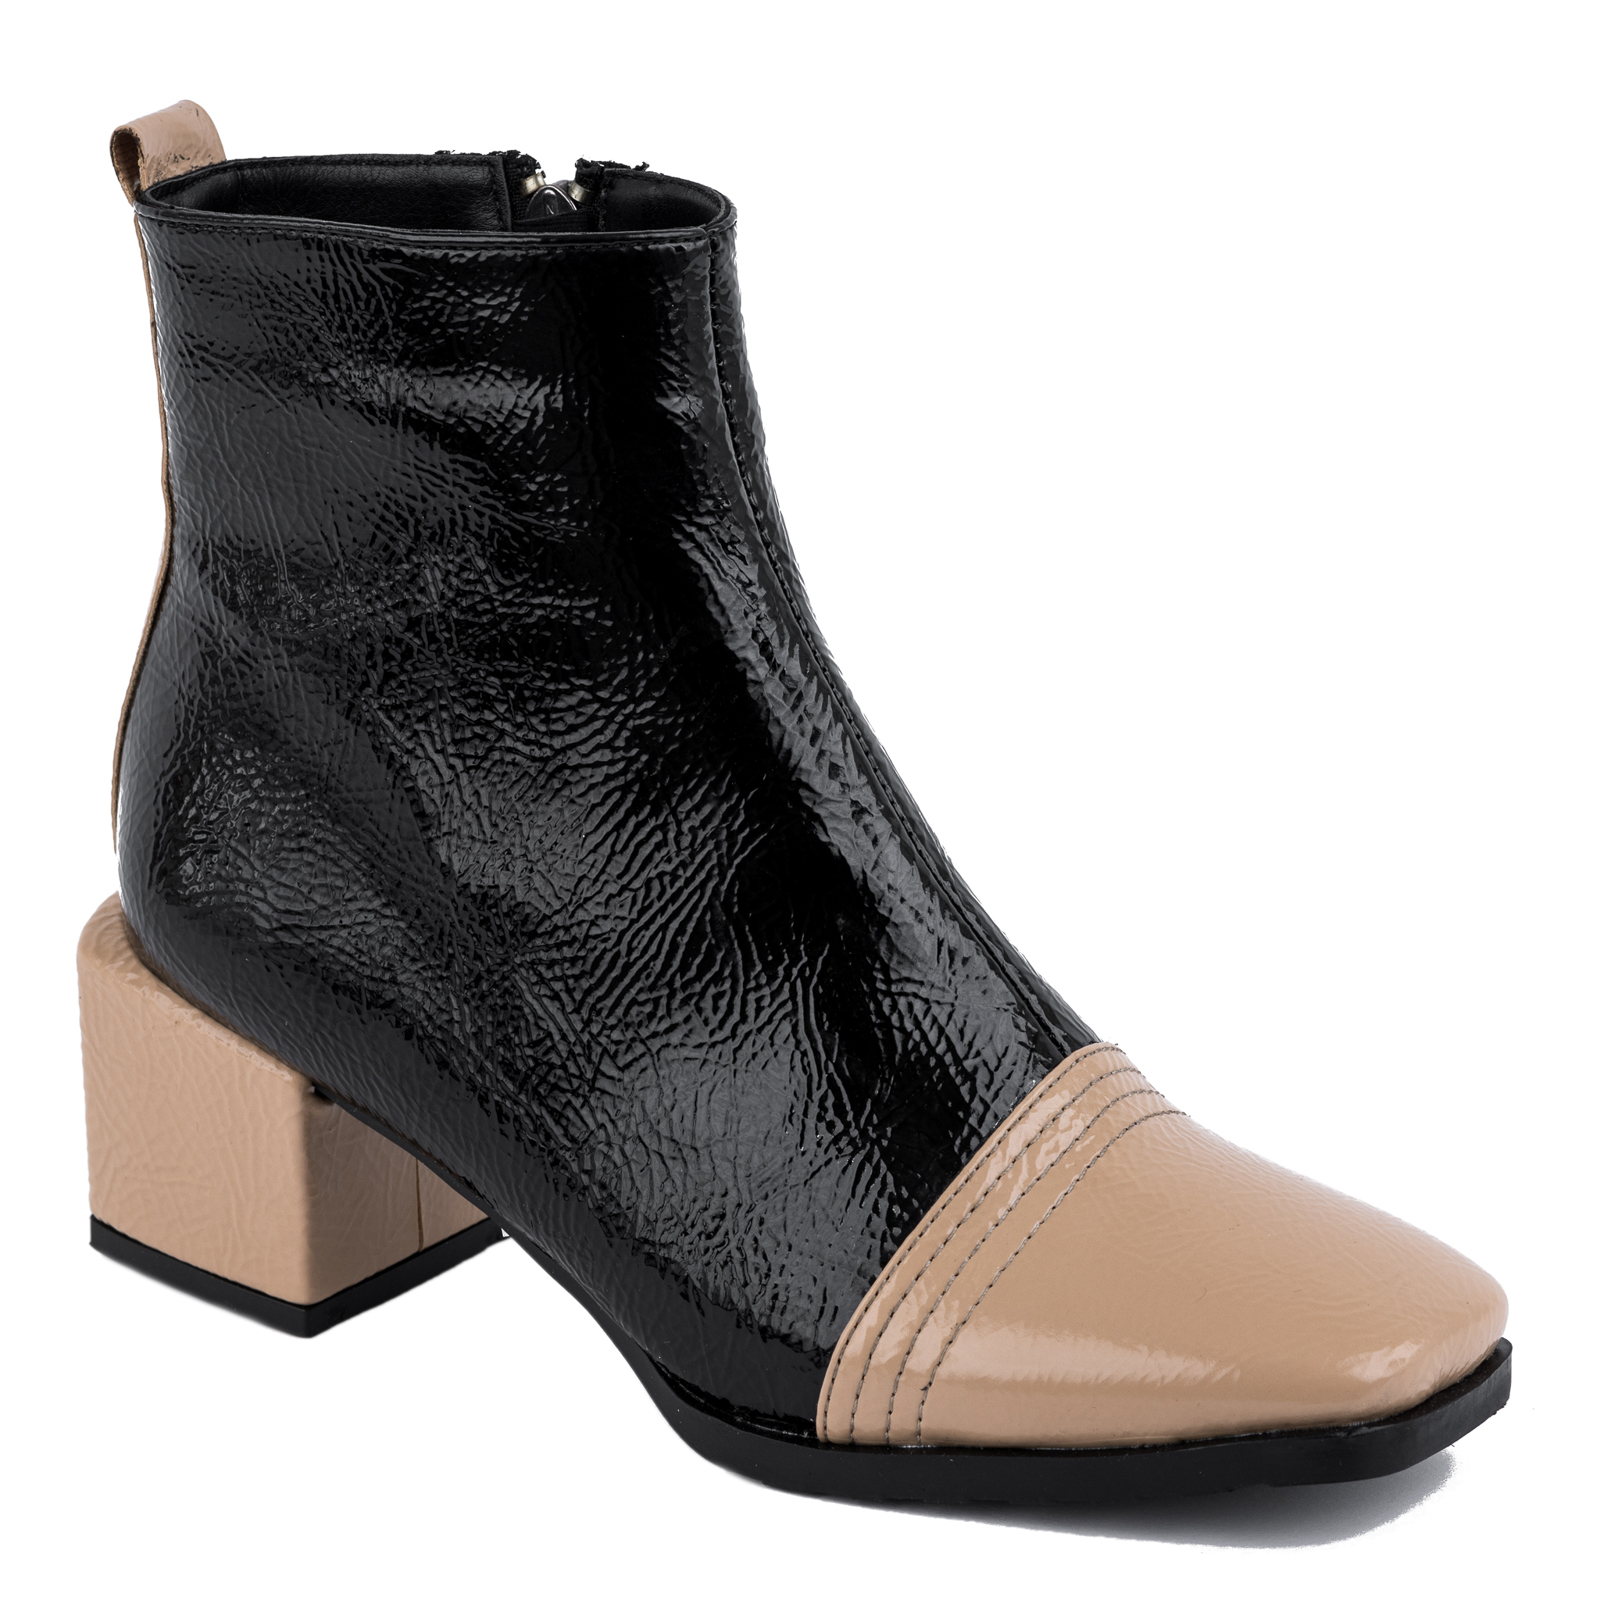 PATENT ANKLE BOOTS WITH BEIGE HEEL - BLACK